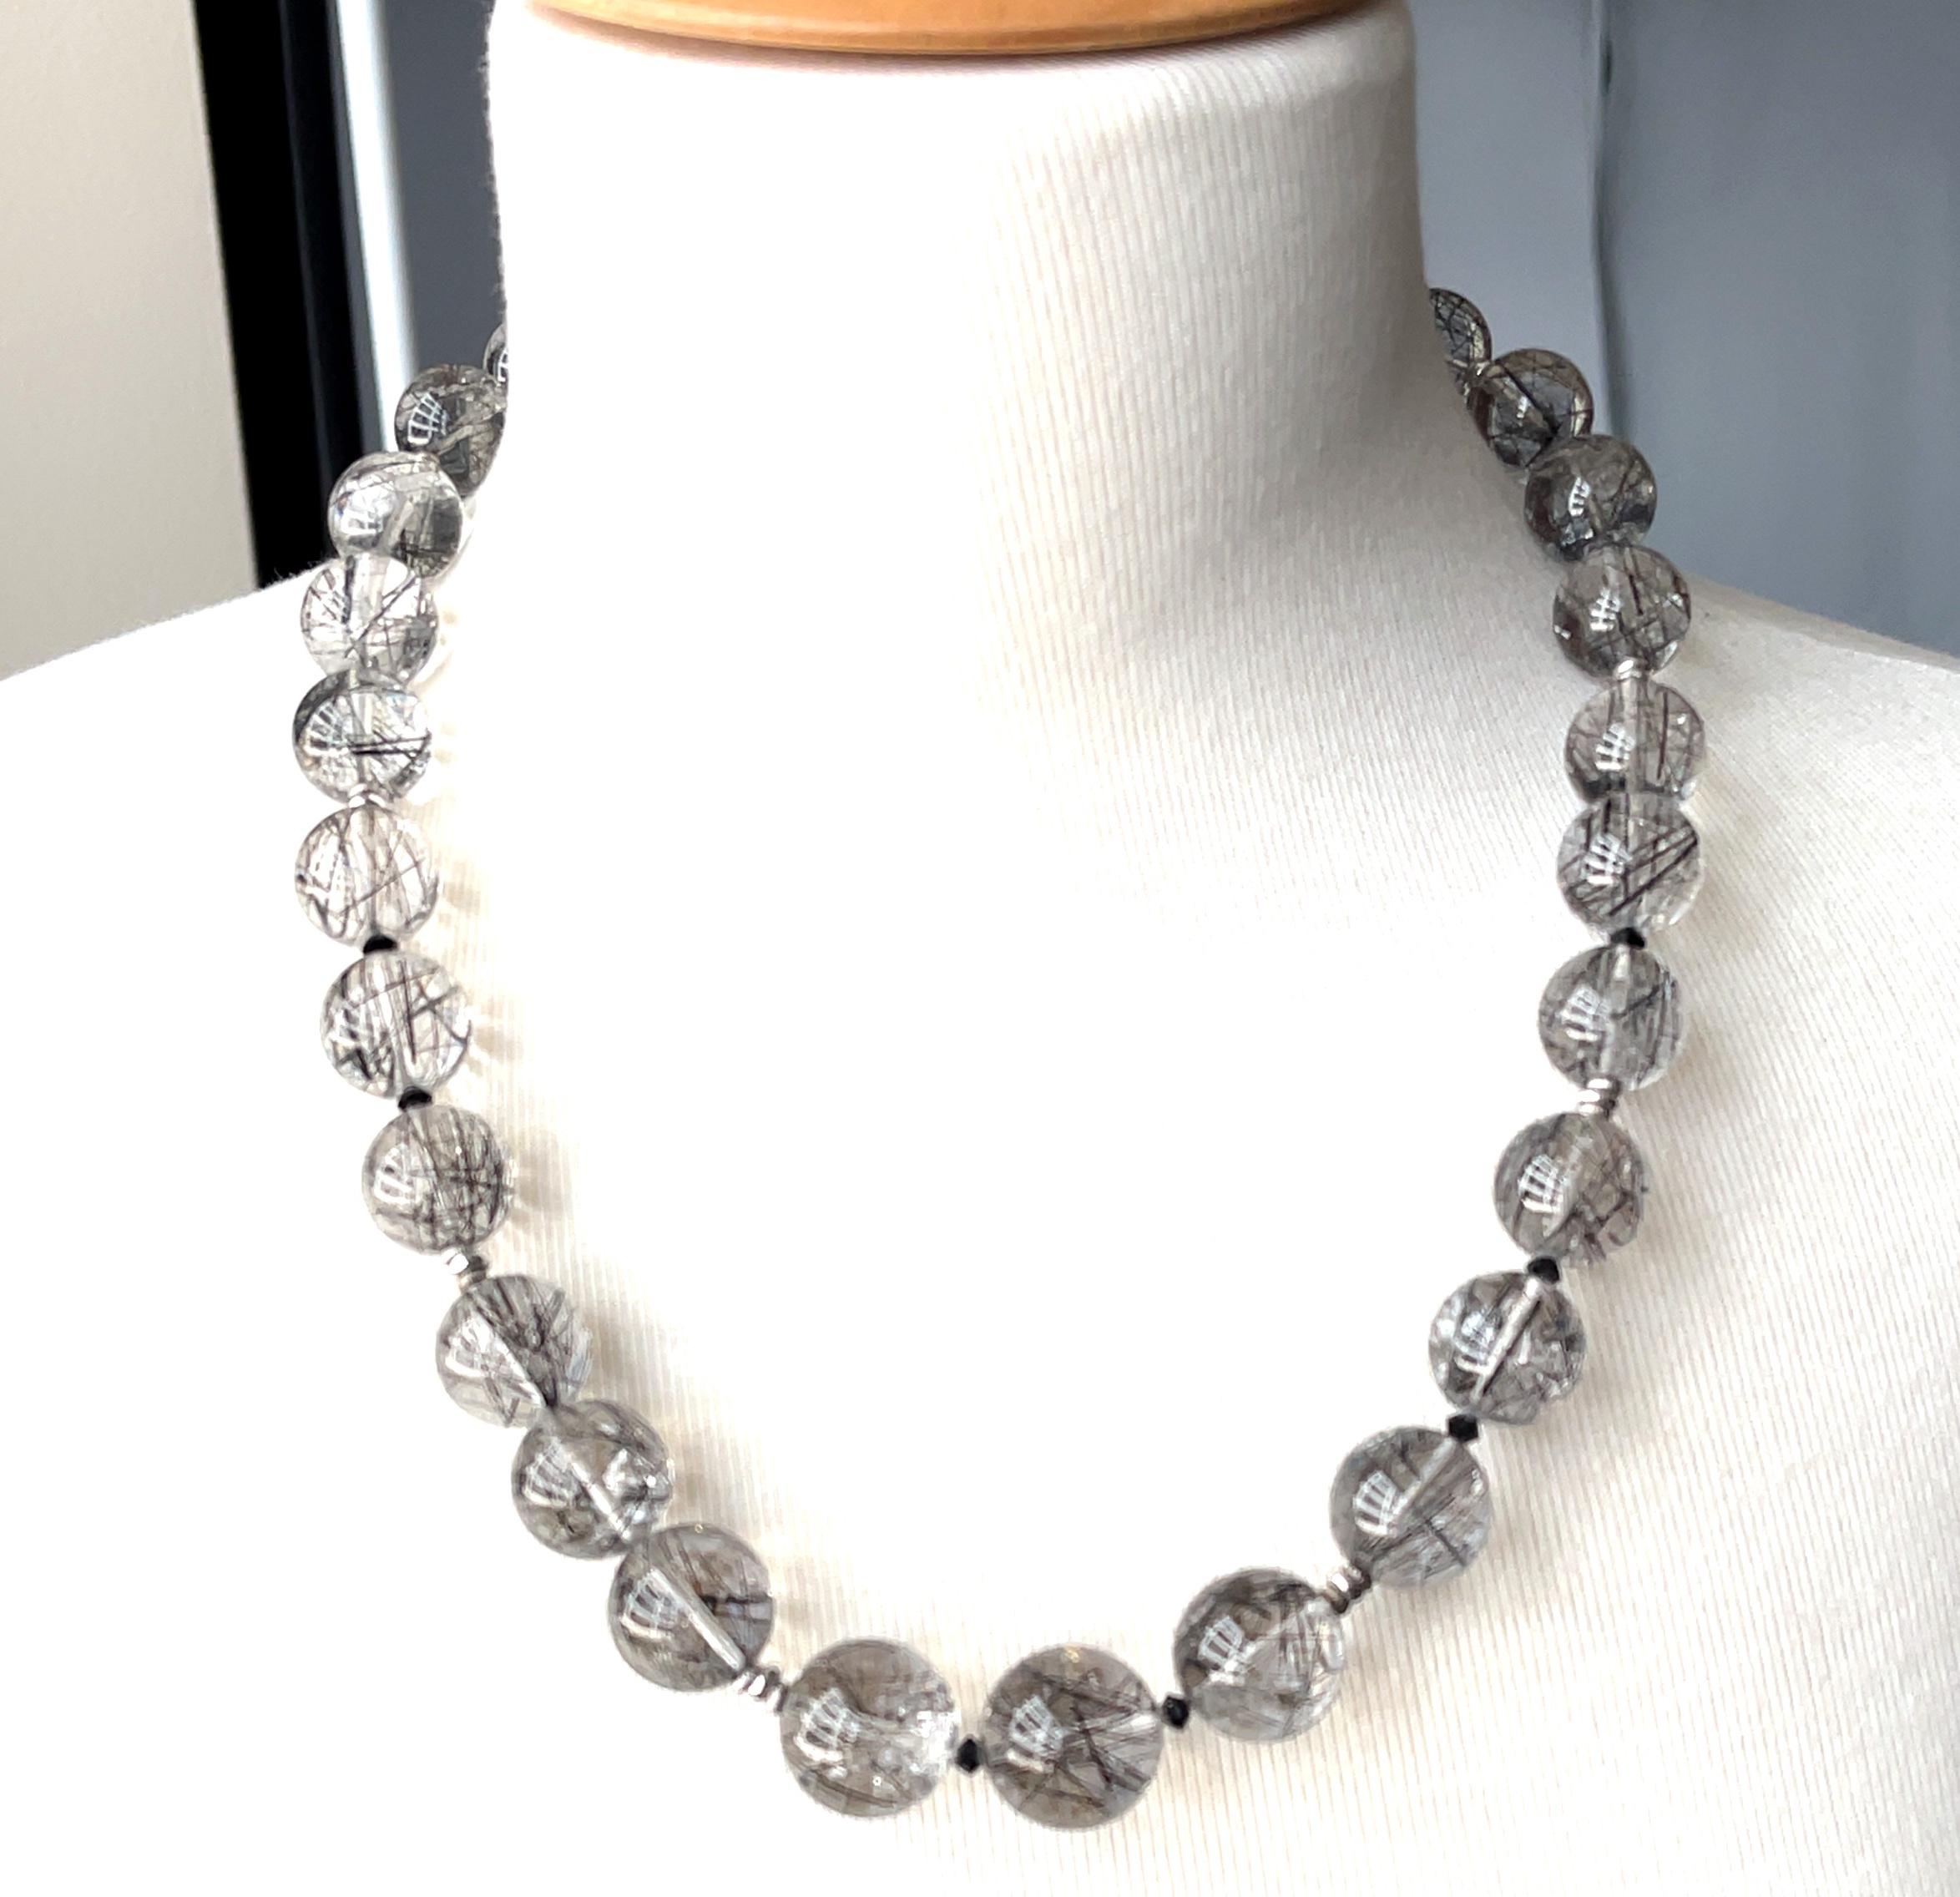 Women's 14-18mm Tourmalinated Quartz Bead Necklace with 14k White Gold Clasp and Spacers